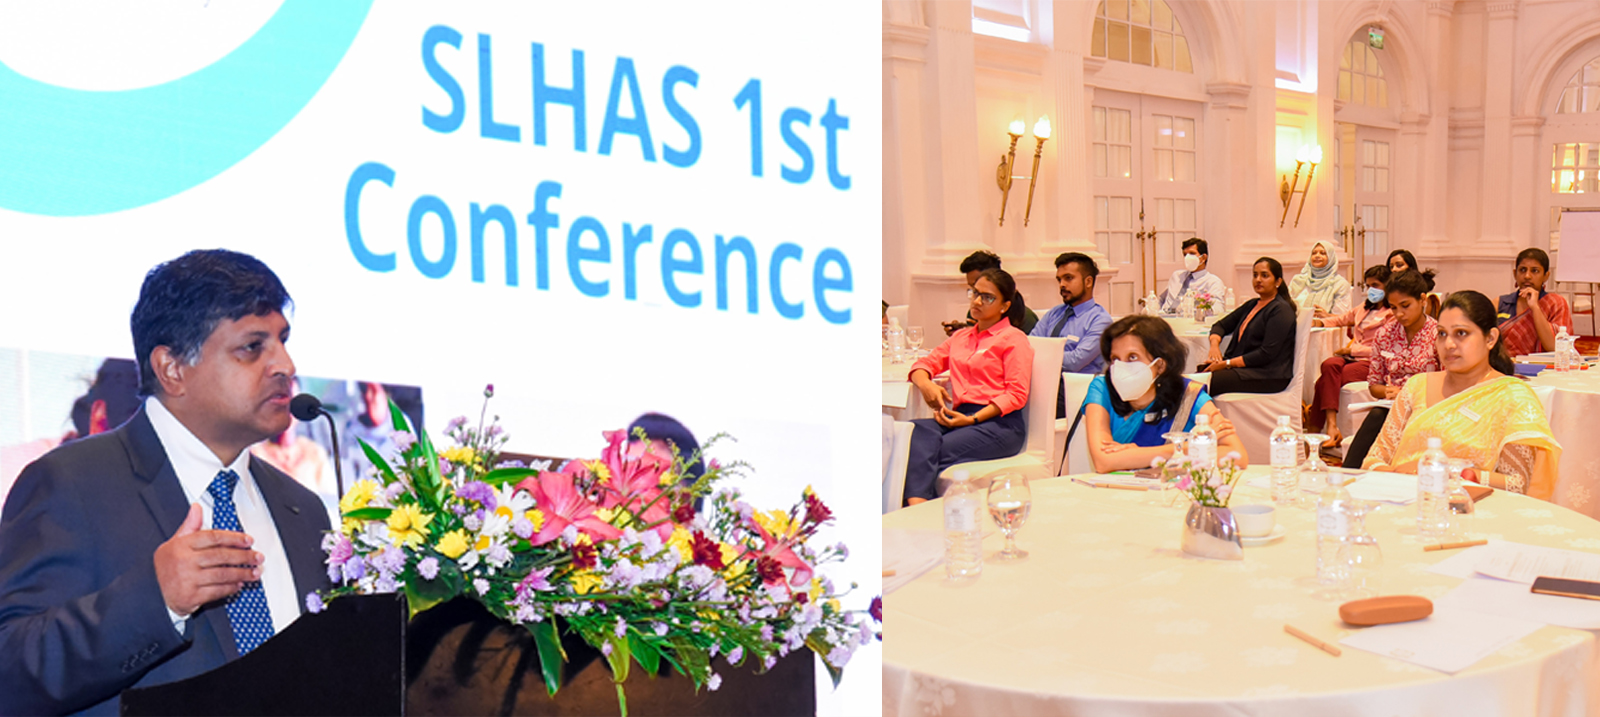 SLHAS 1st conference